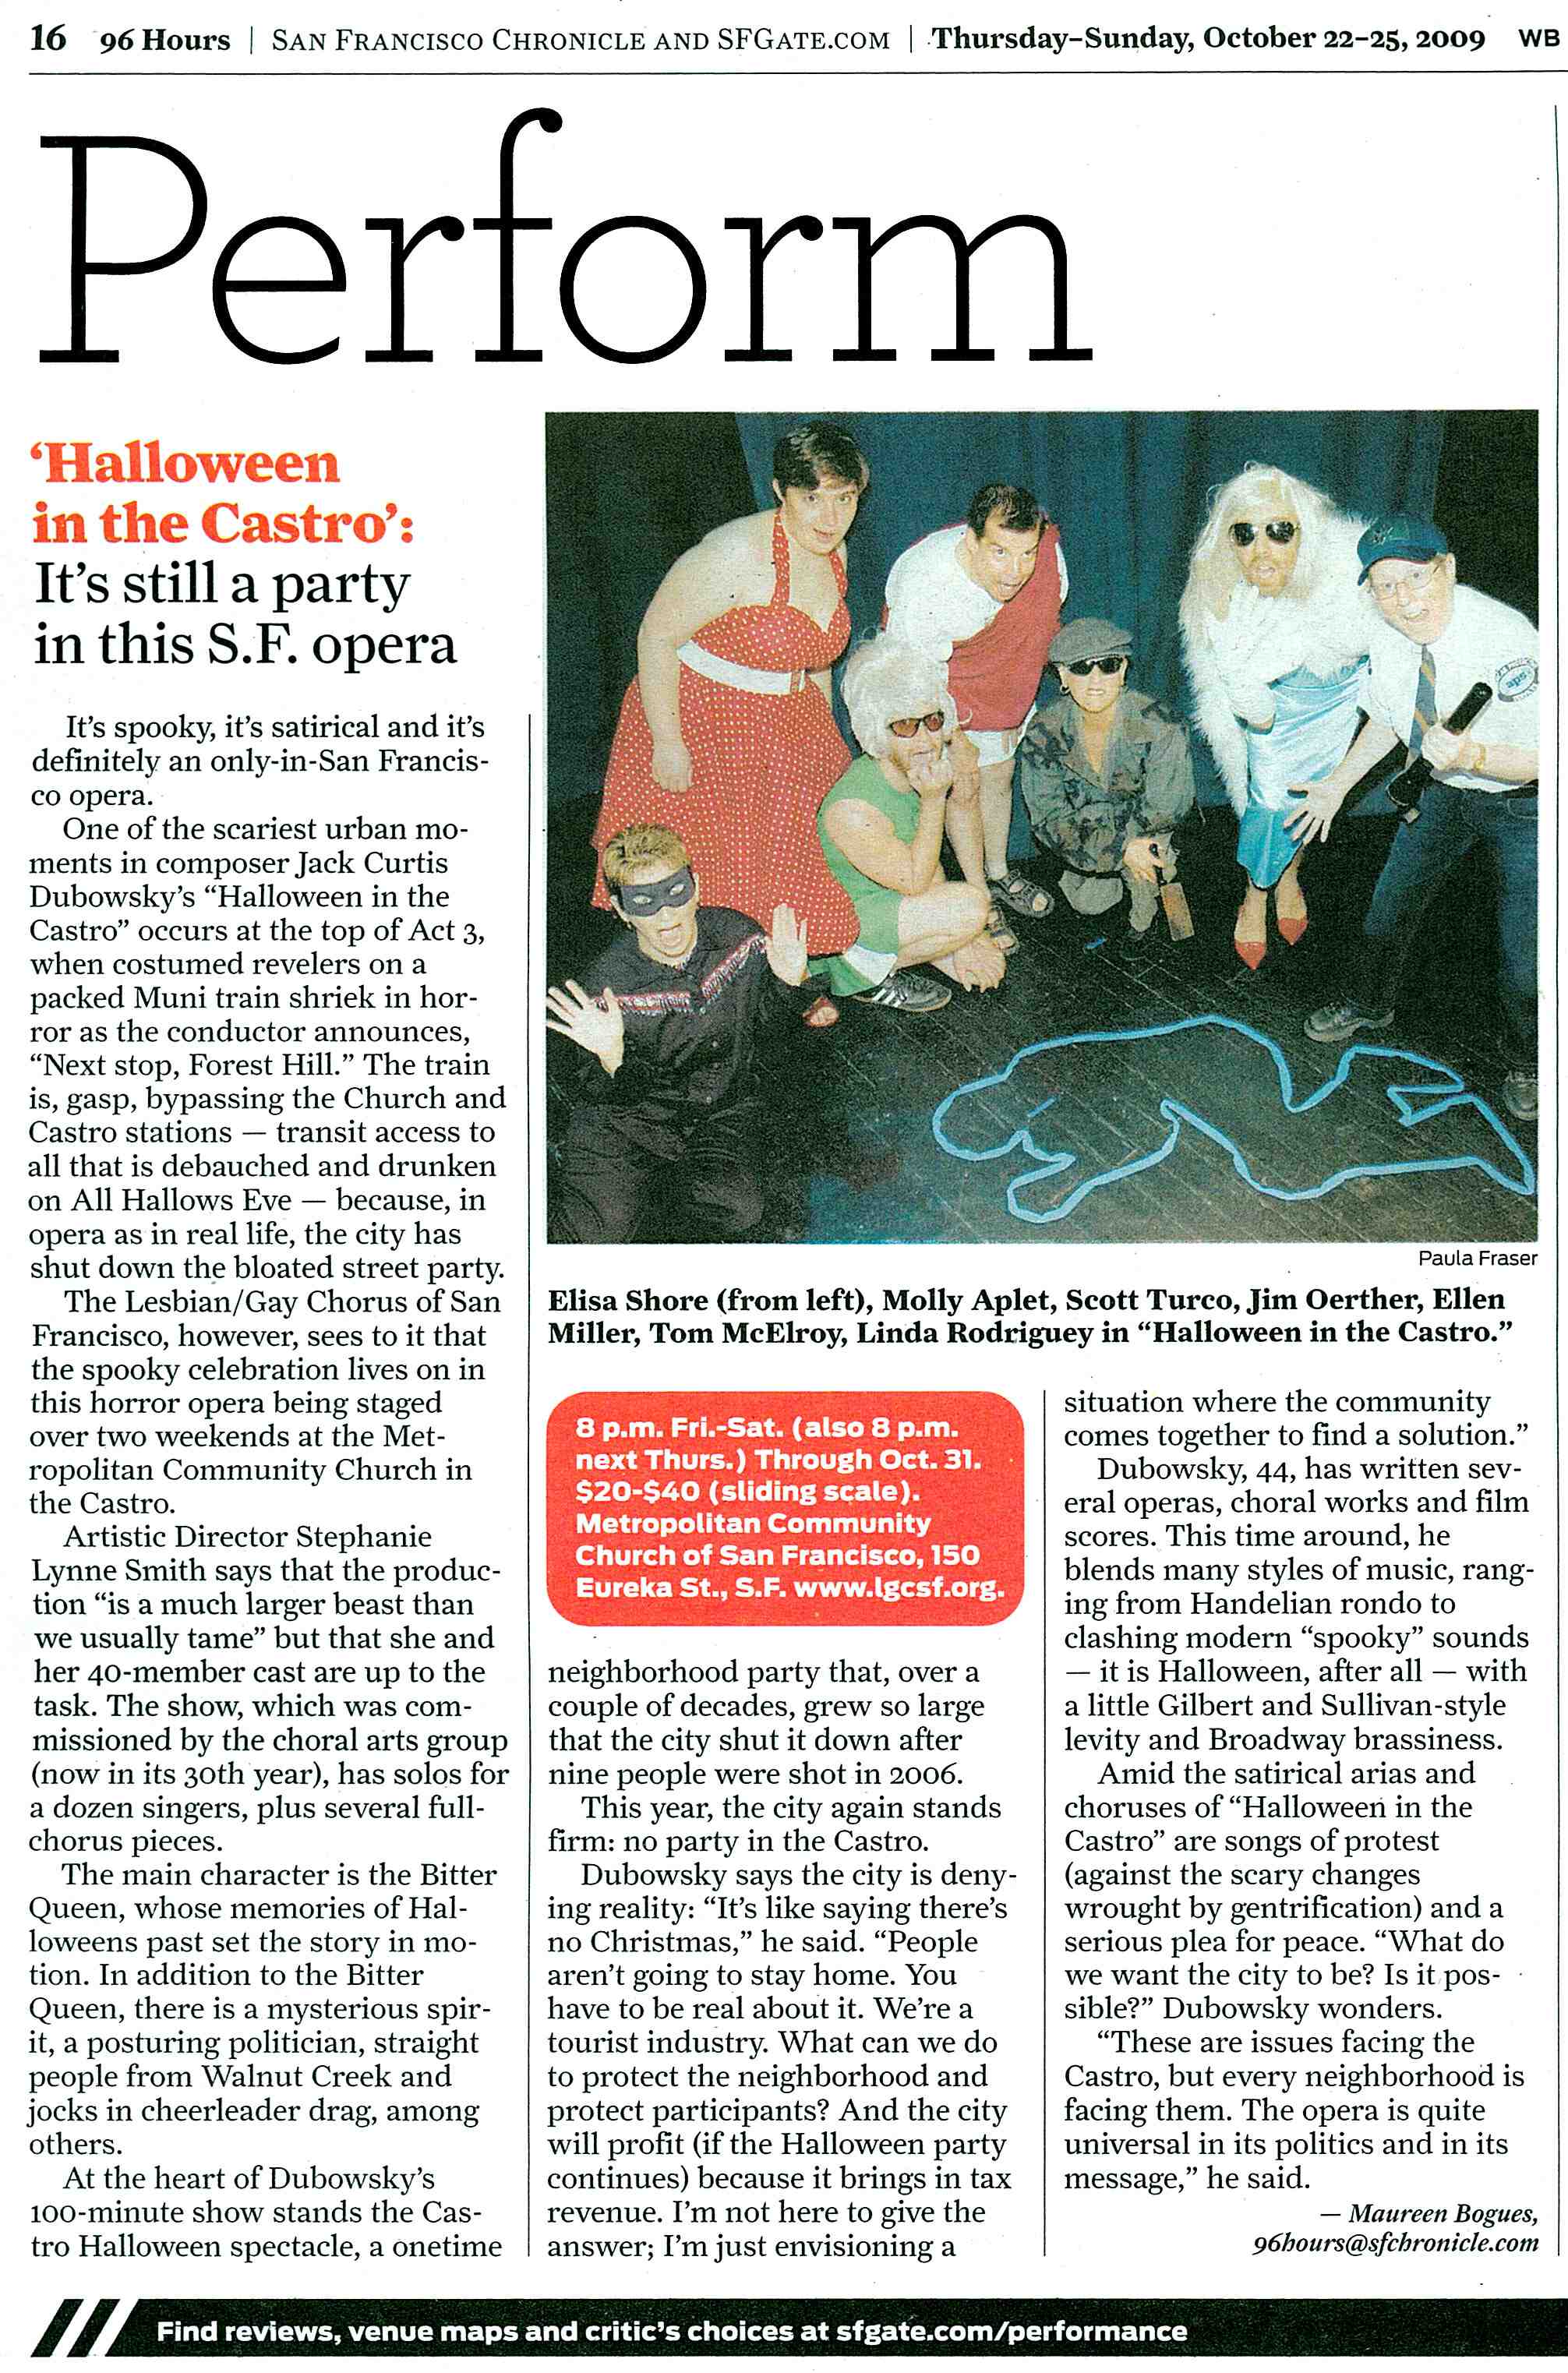 San Francisco Chronicle Datebook previews Halloween in the Castro